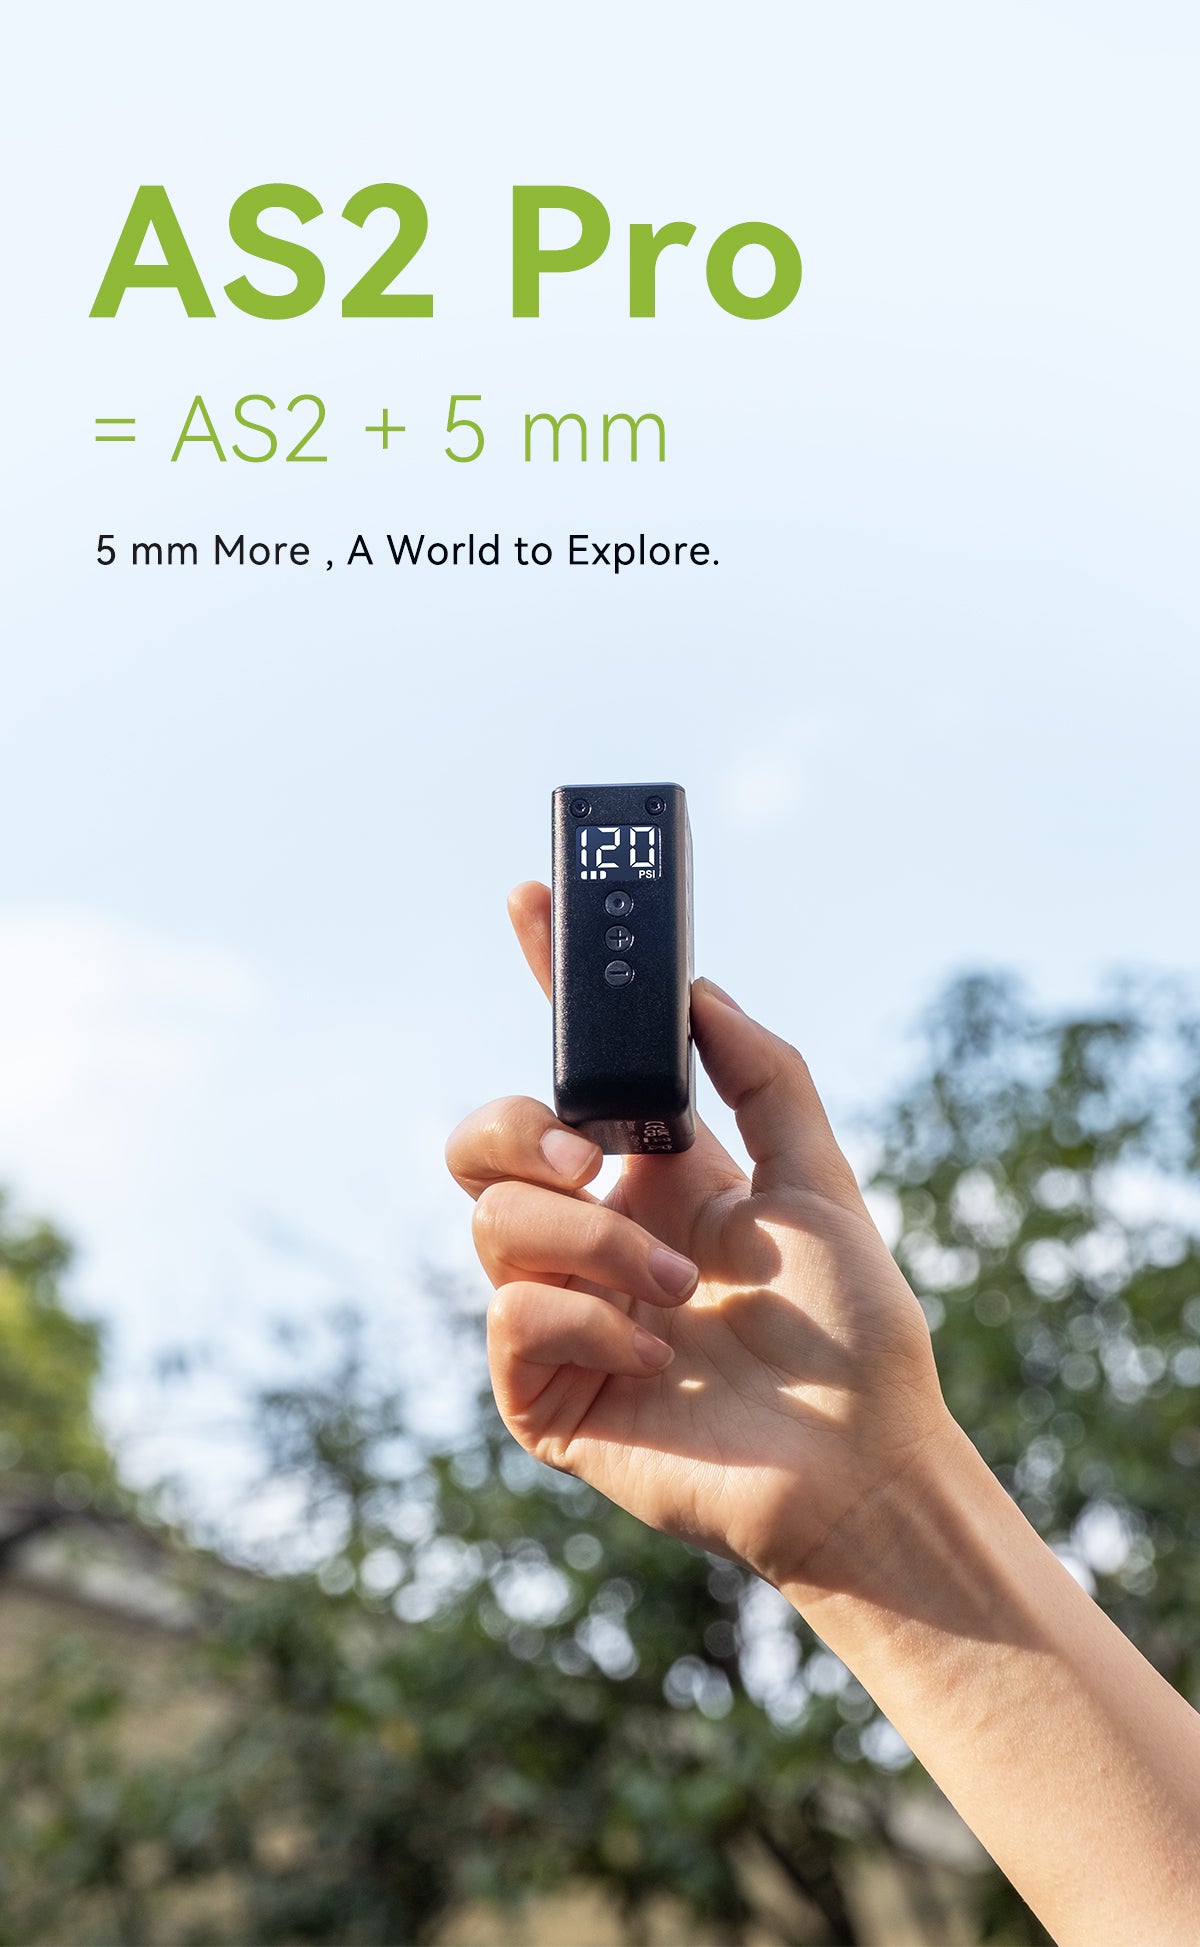 AS2 Pro = AS2 + 5 mm  5 mm More, A World to Explore.